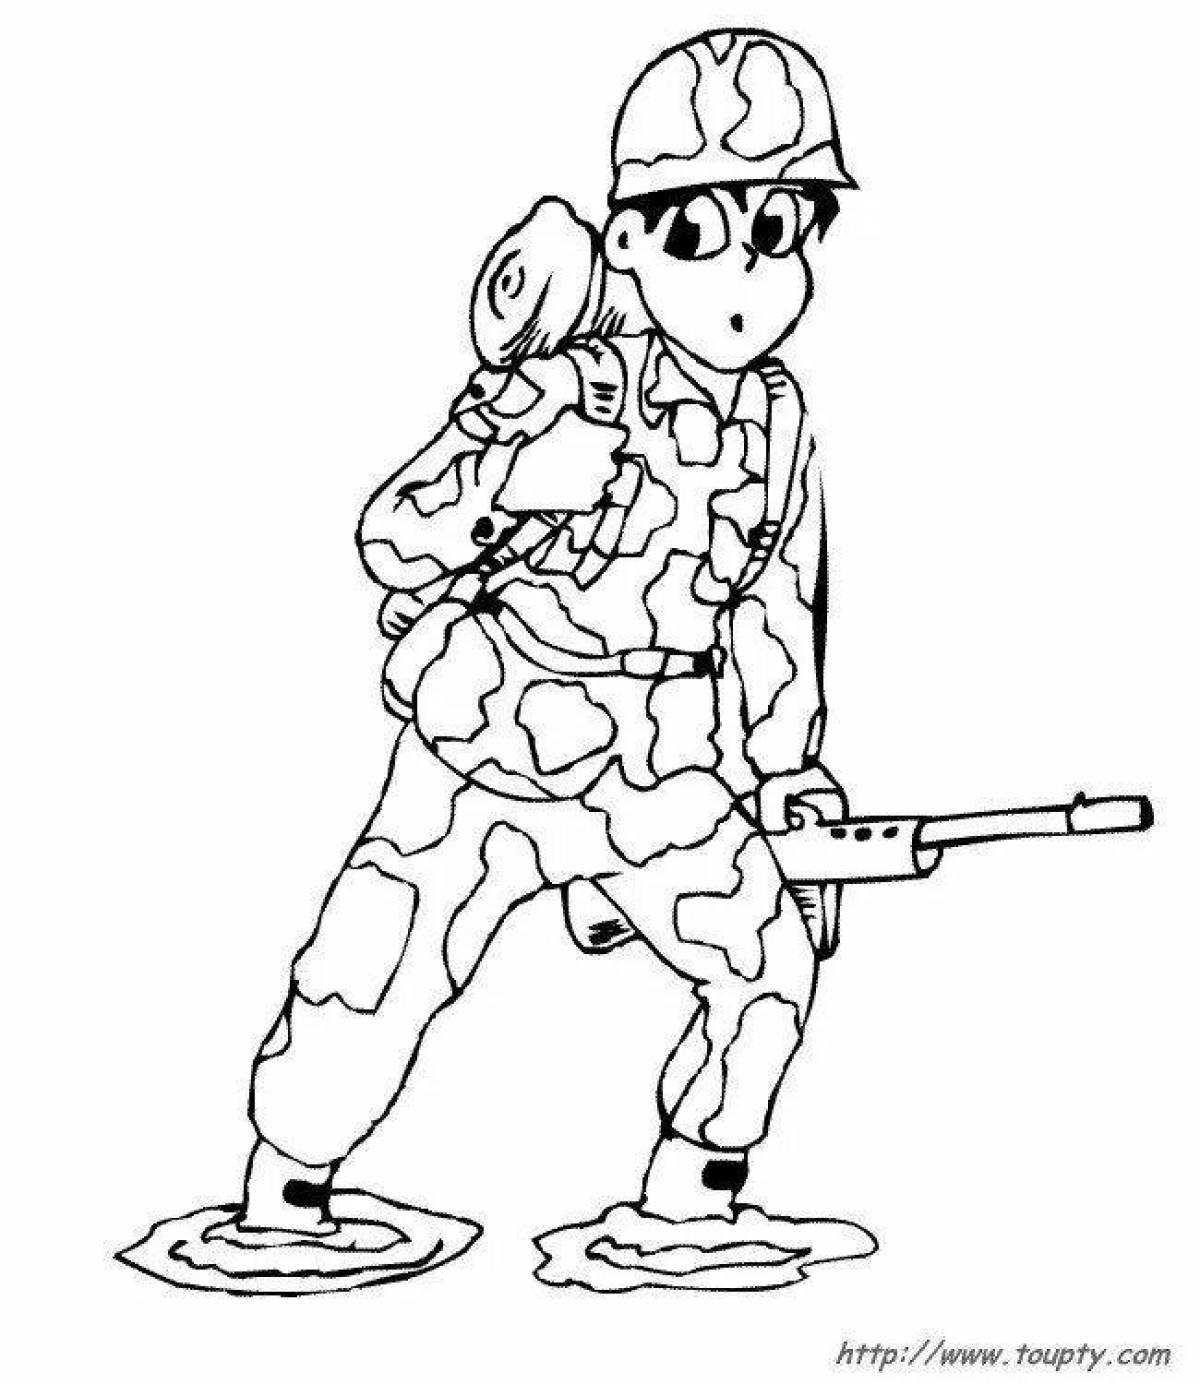 Innovative soldier coloring for children